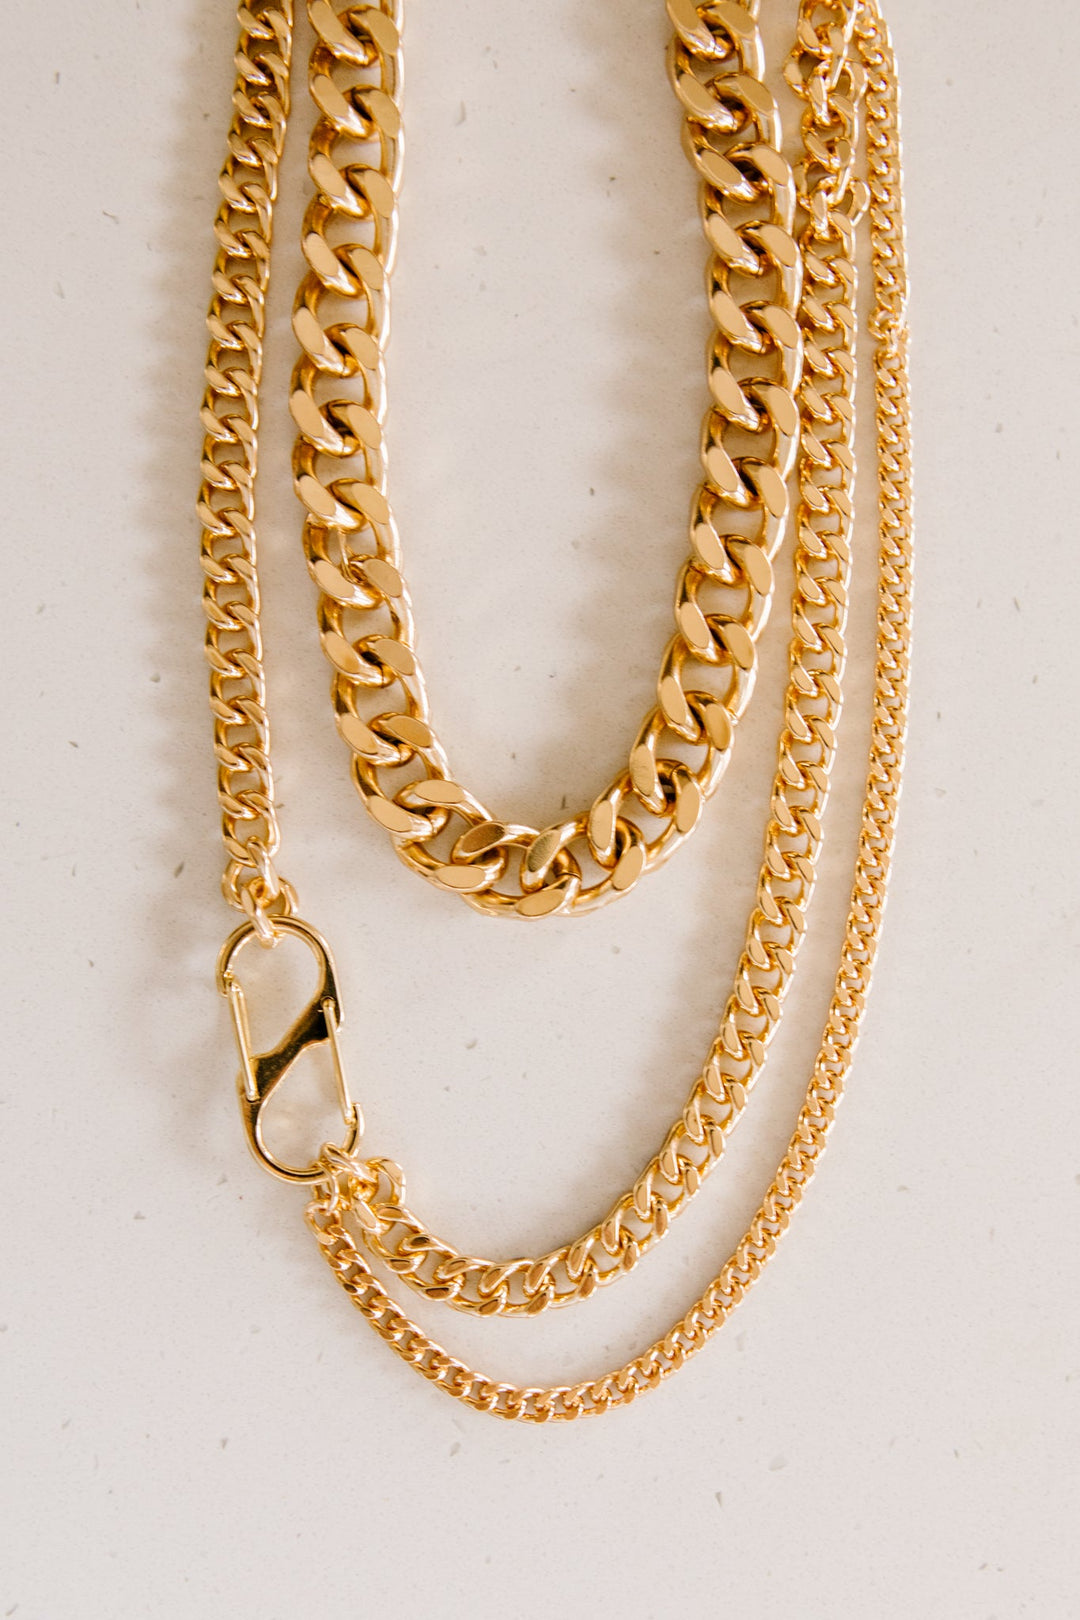 Chain It Up Necklaces in Gold